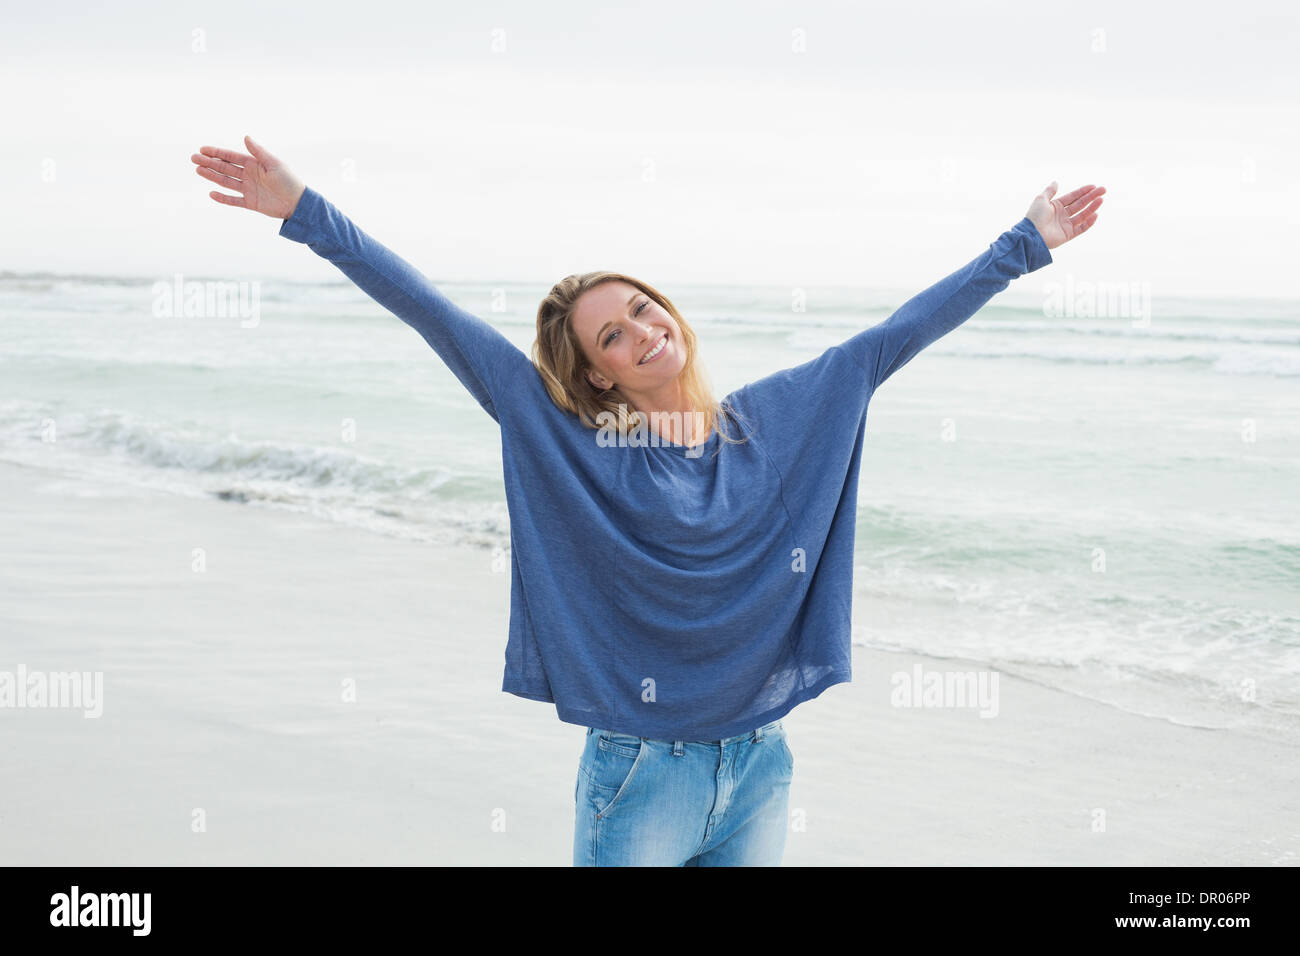 Happy woman with hands raised at beach Banque D'Images